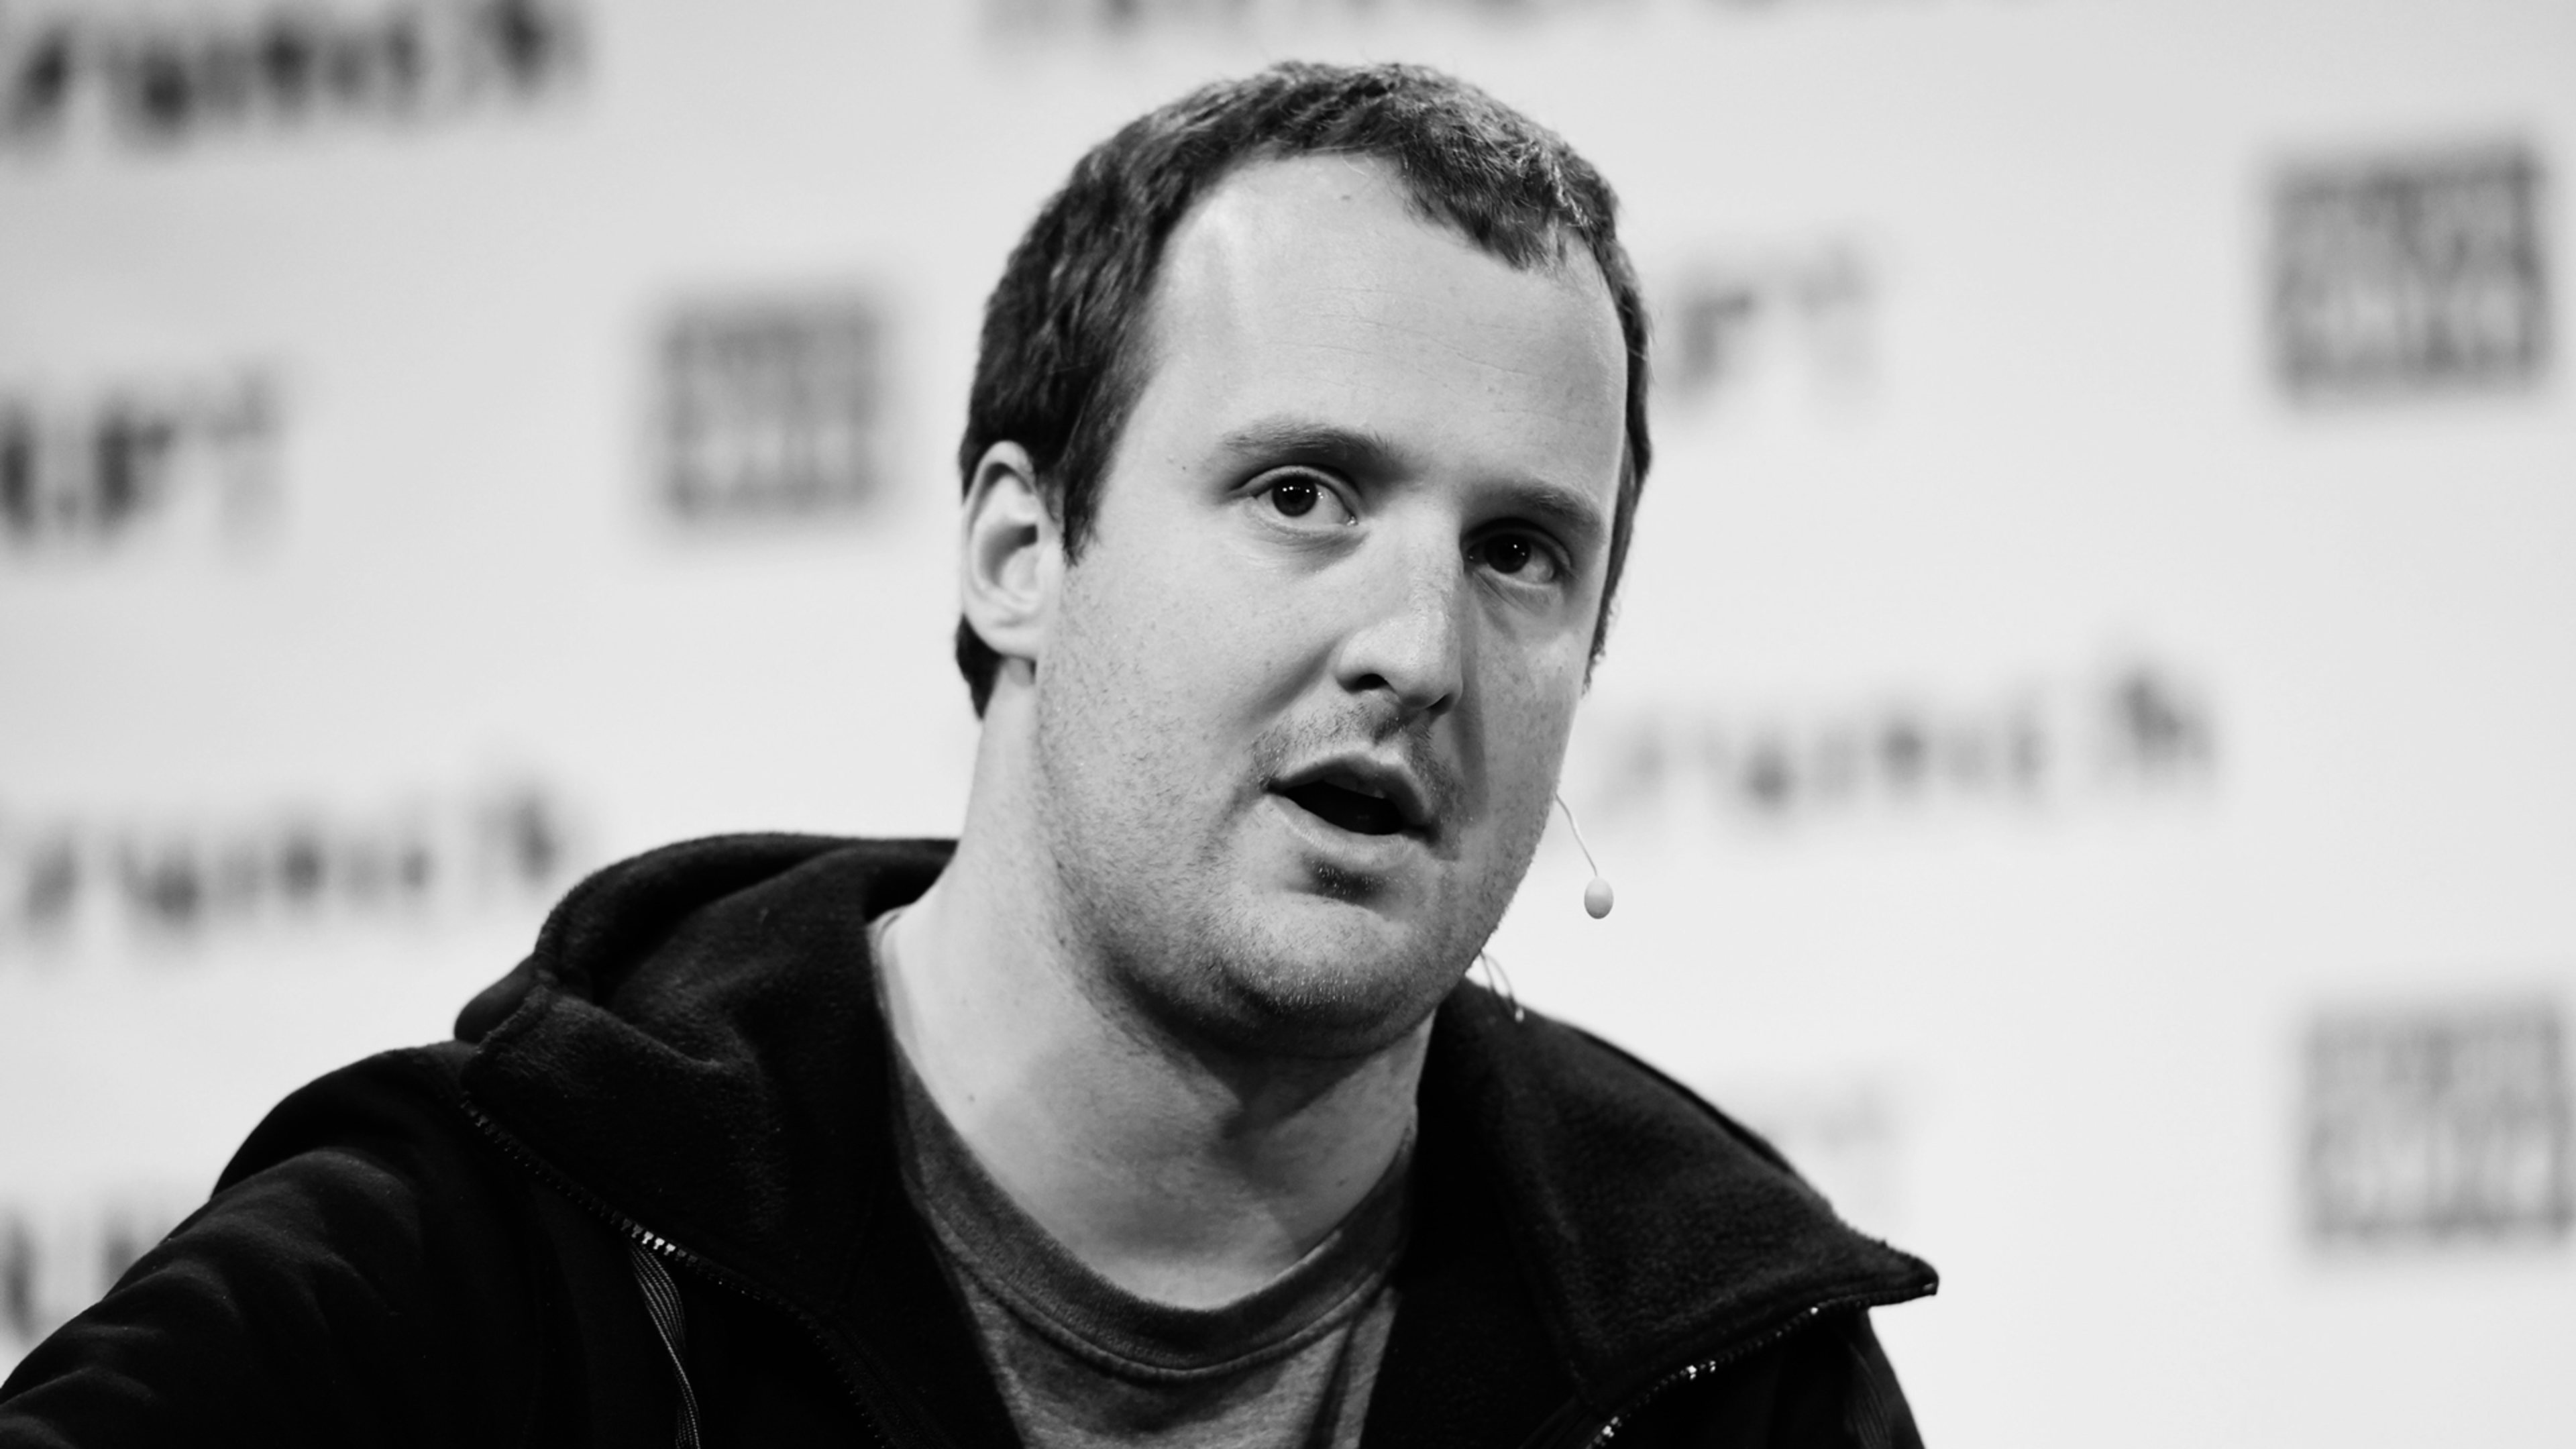 Kik’s $100 million ICO for Kin cryptocurrency was “illegal,” says SEC